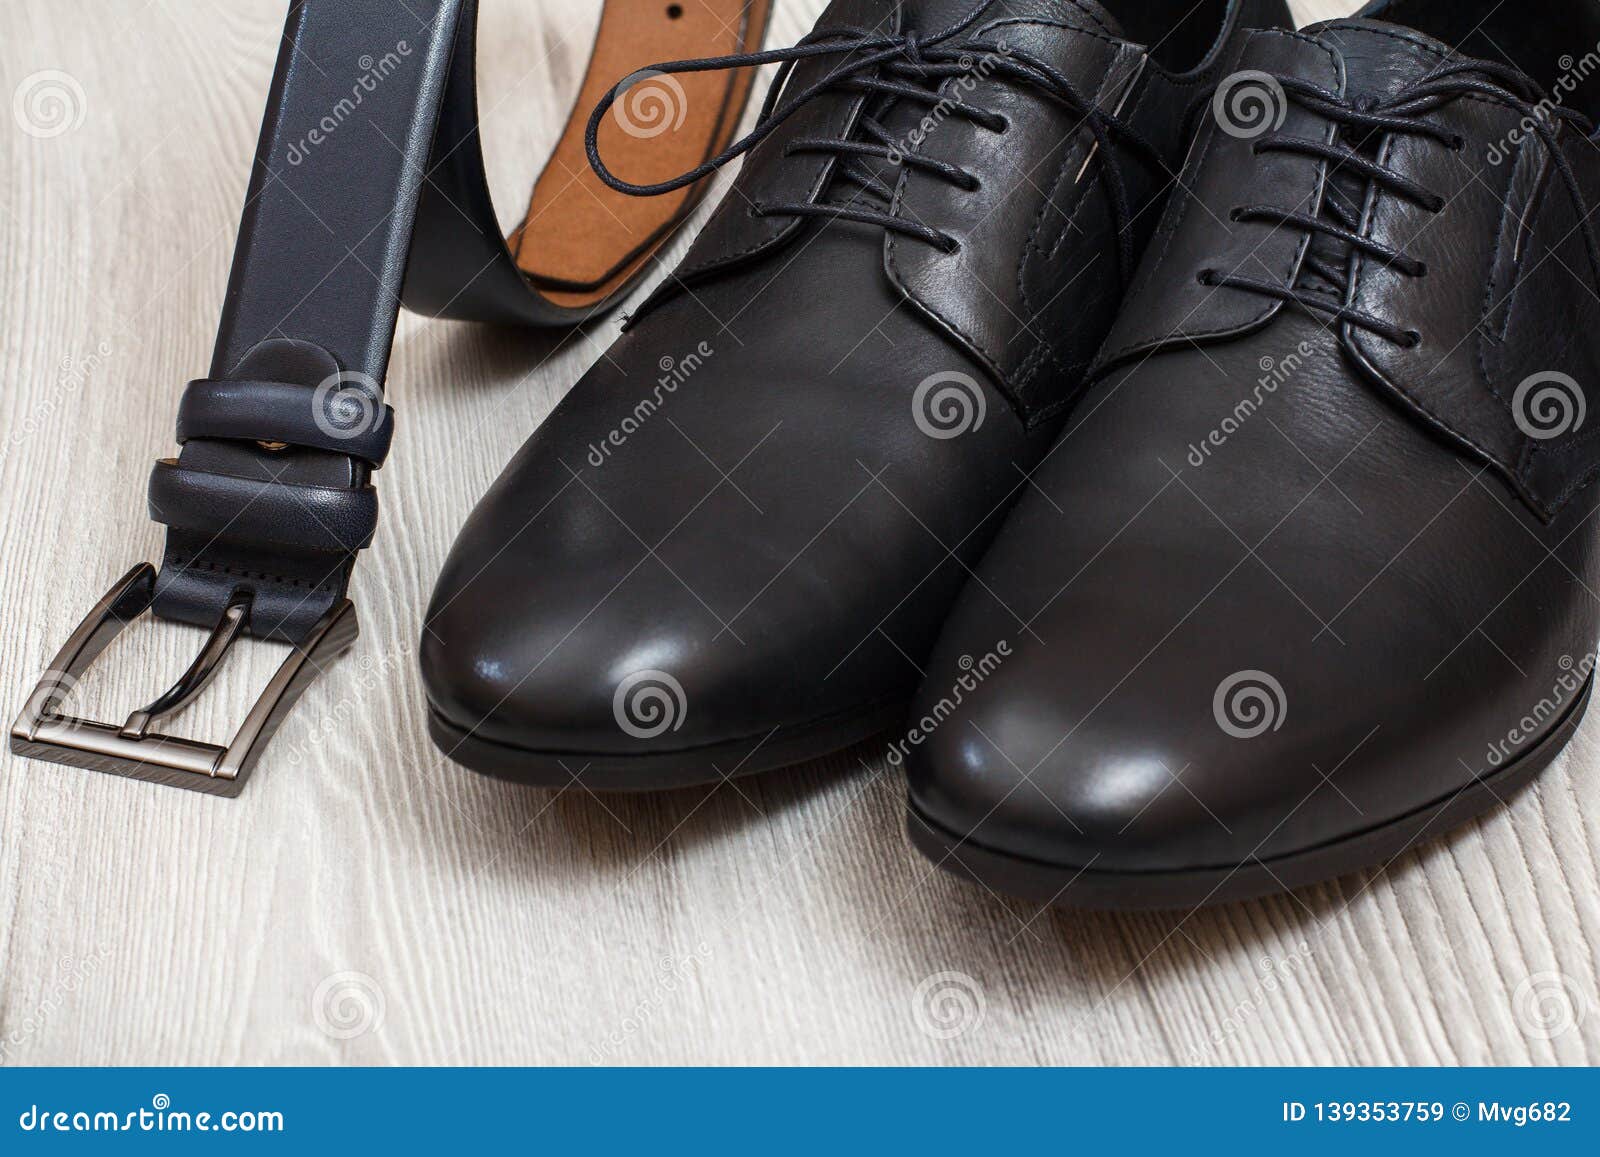 Pair of Black Leather Men`s Shoes and Leather Belt for Men on Wooden ...